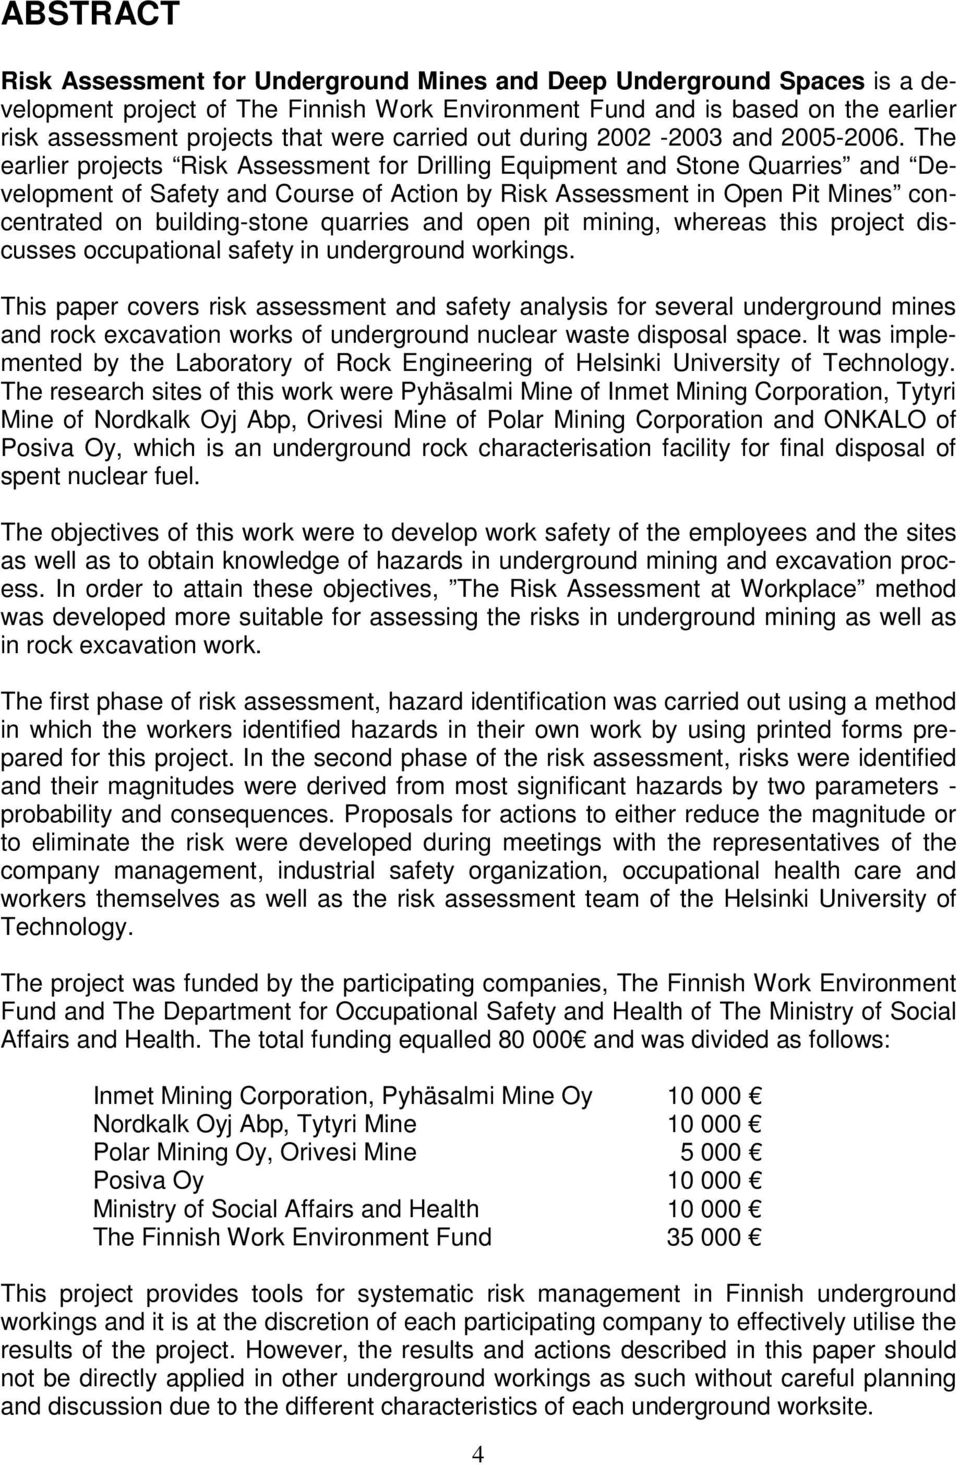 The earlier projects Risk Assessment for Drilling Equipment and Stone Quarries and Development of Safety and Course of Action by Risk Assessment in Open Pit Mines concentrated on building-stone